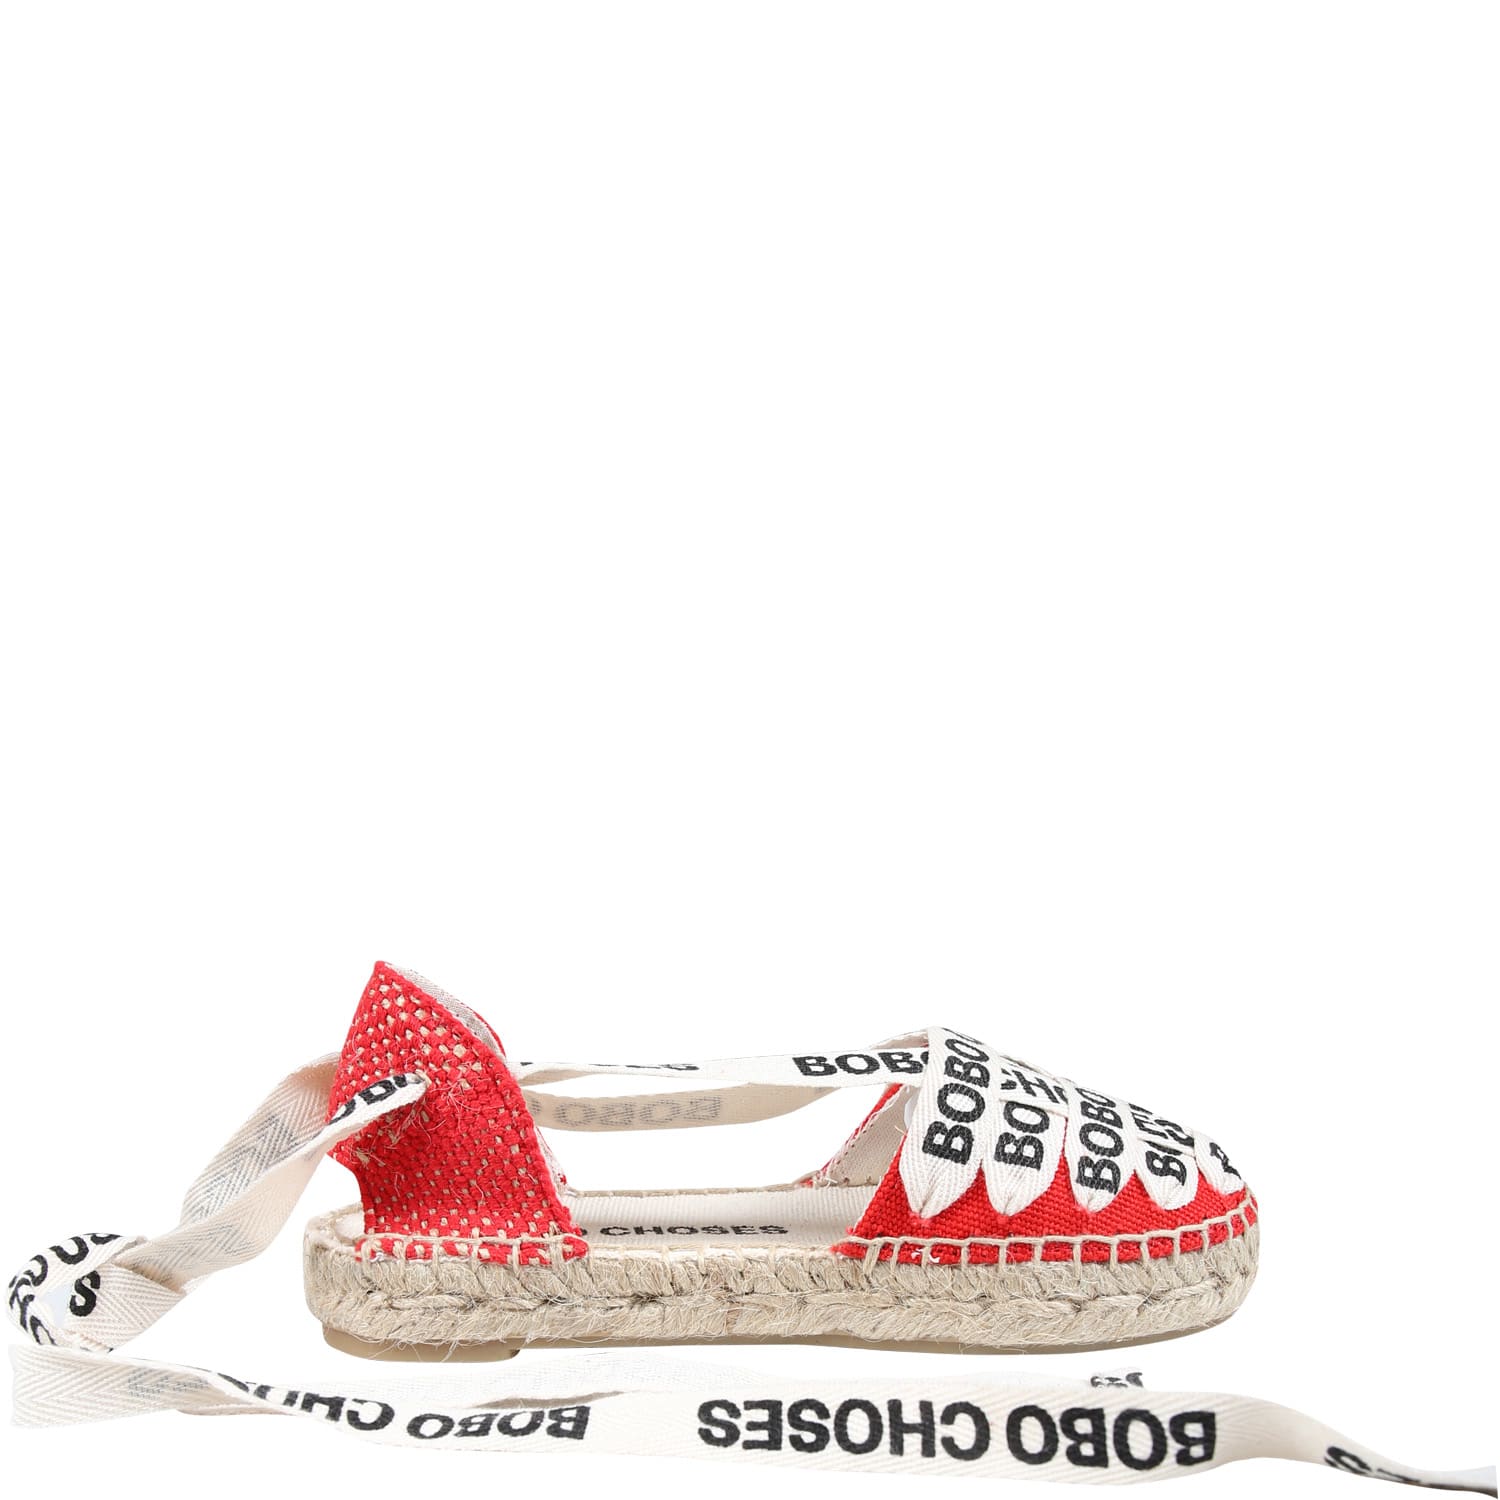 Bobo Choses lace-up cotton espadrilles - Red